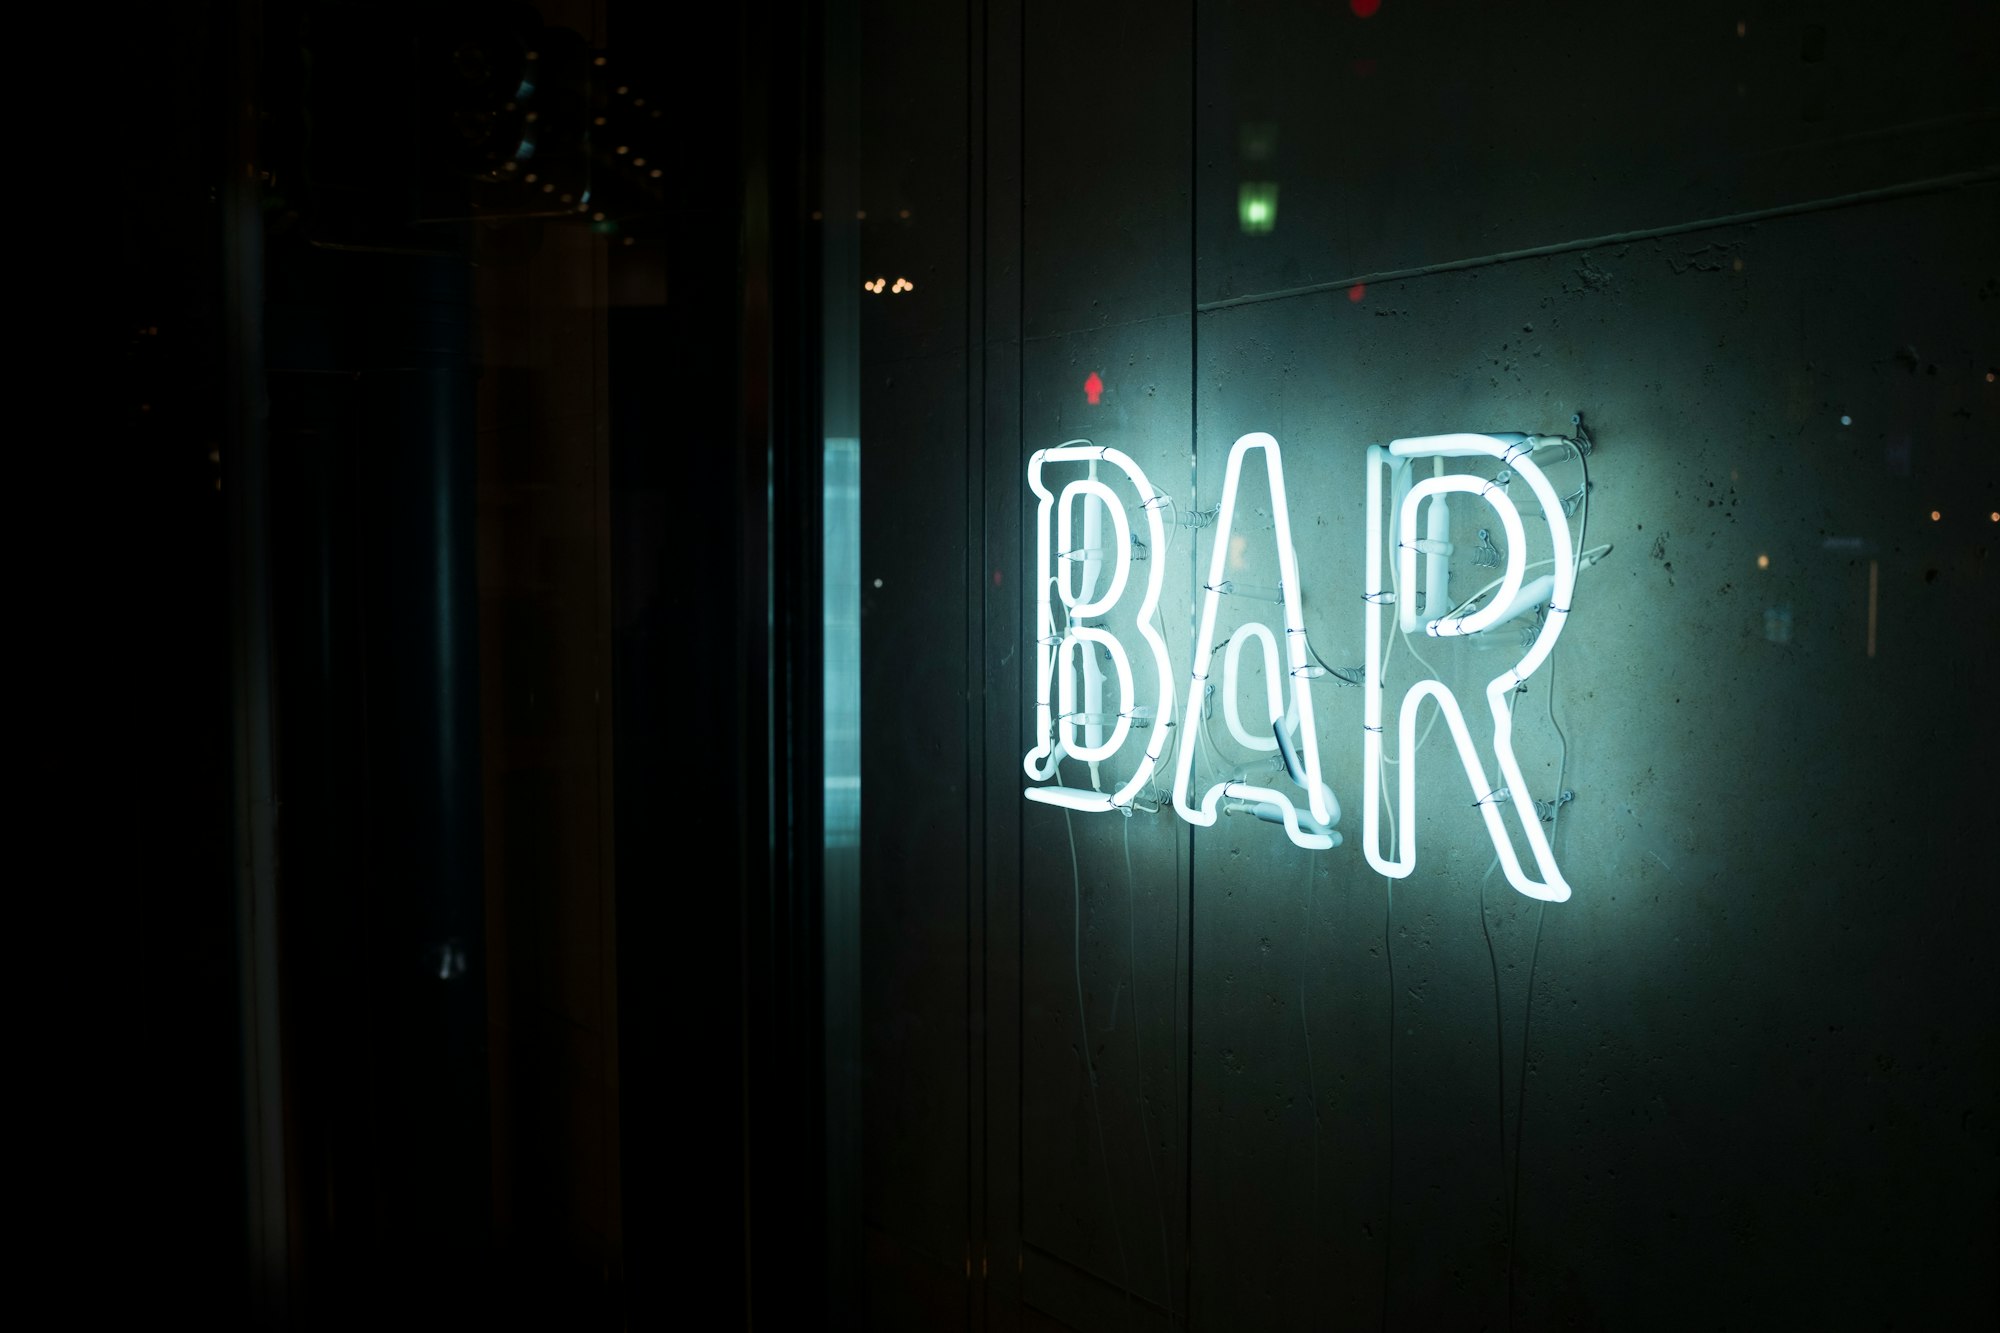 Bar sign with neon letterings.